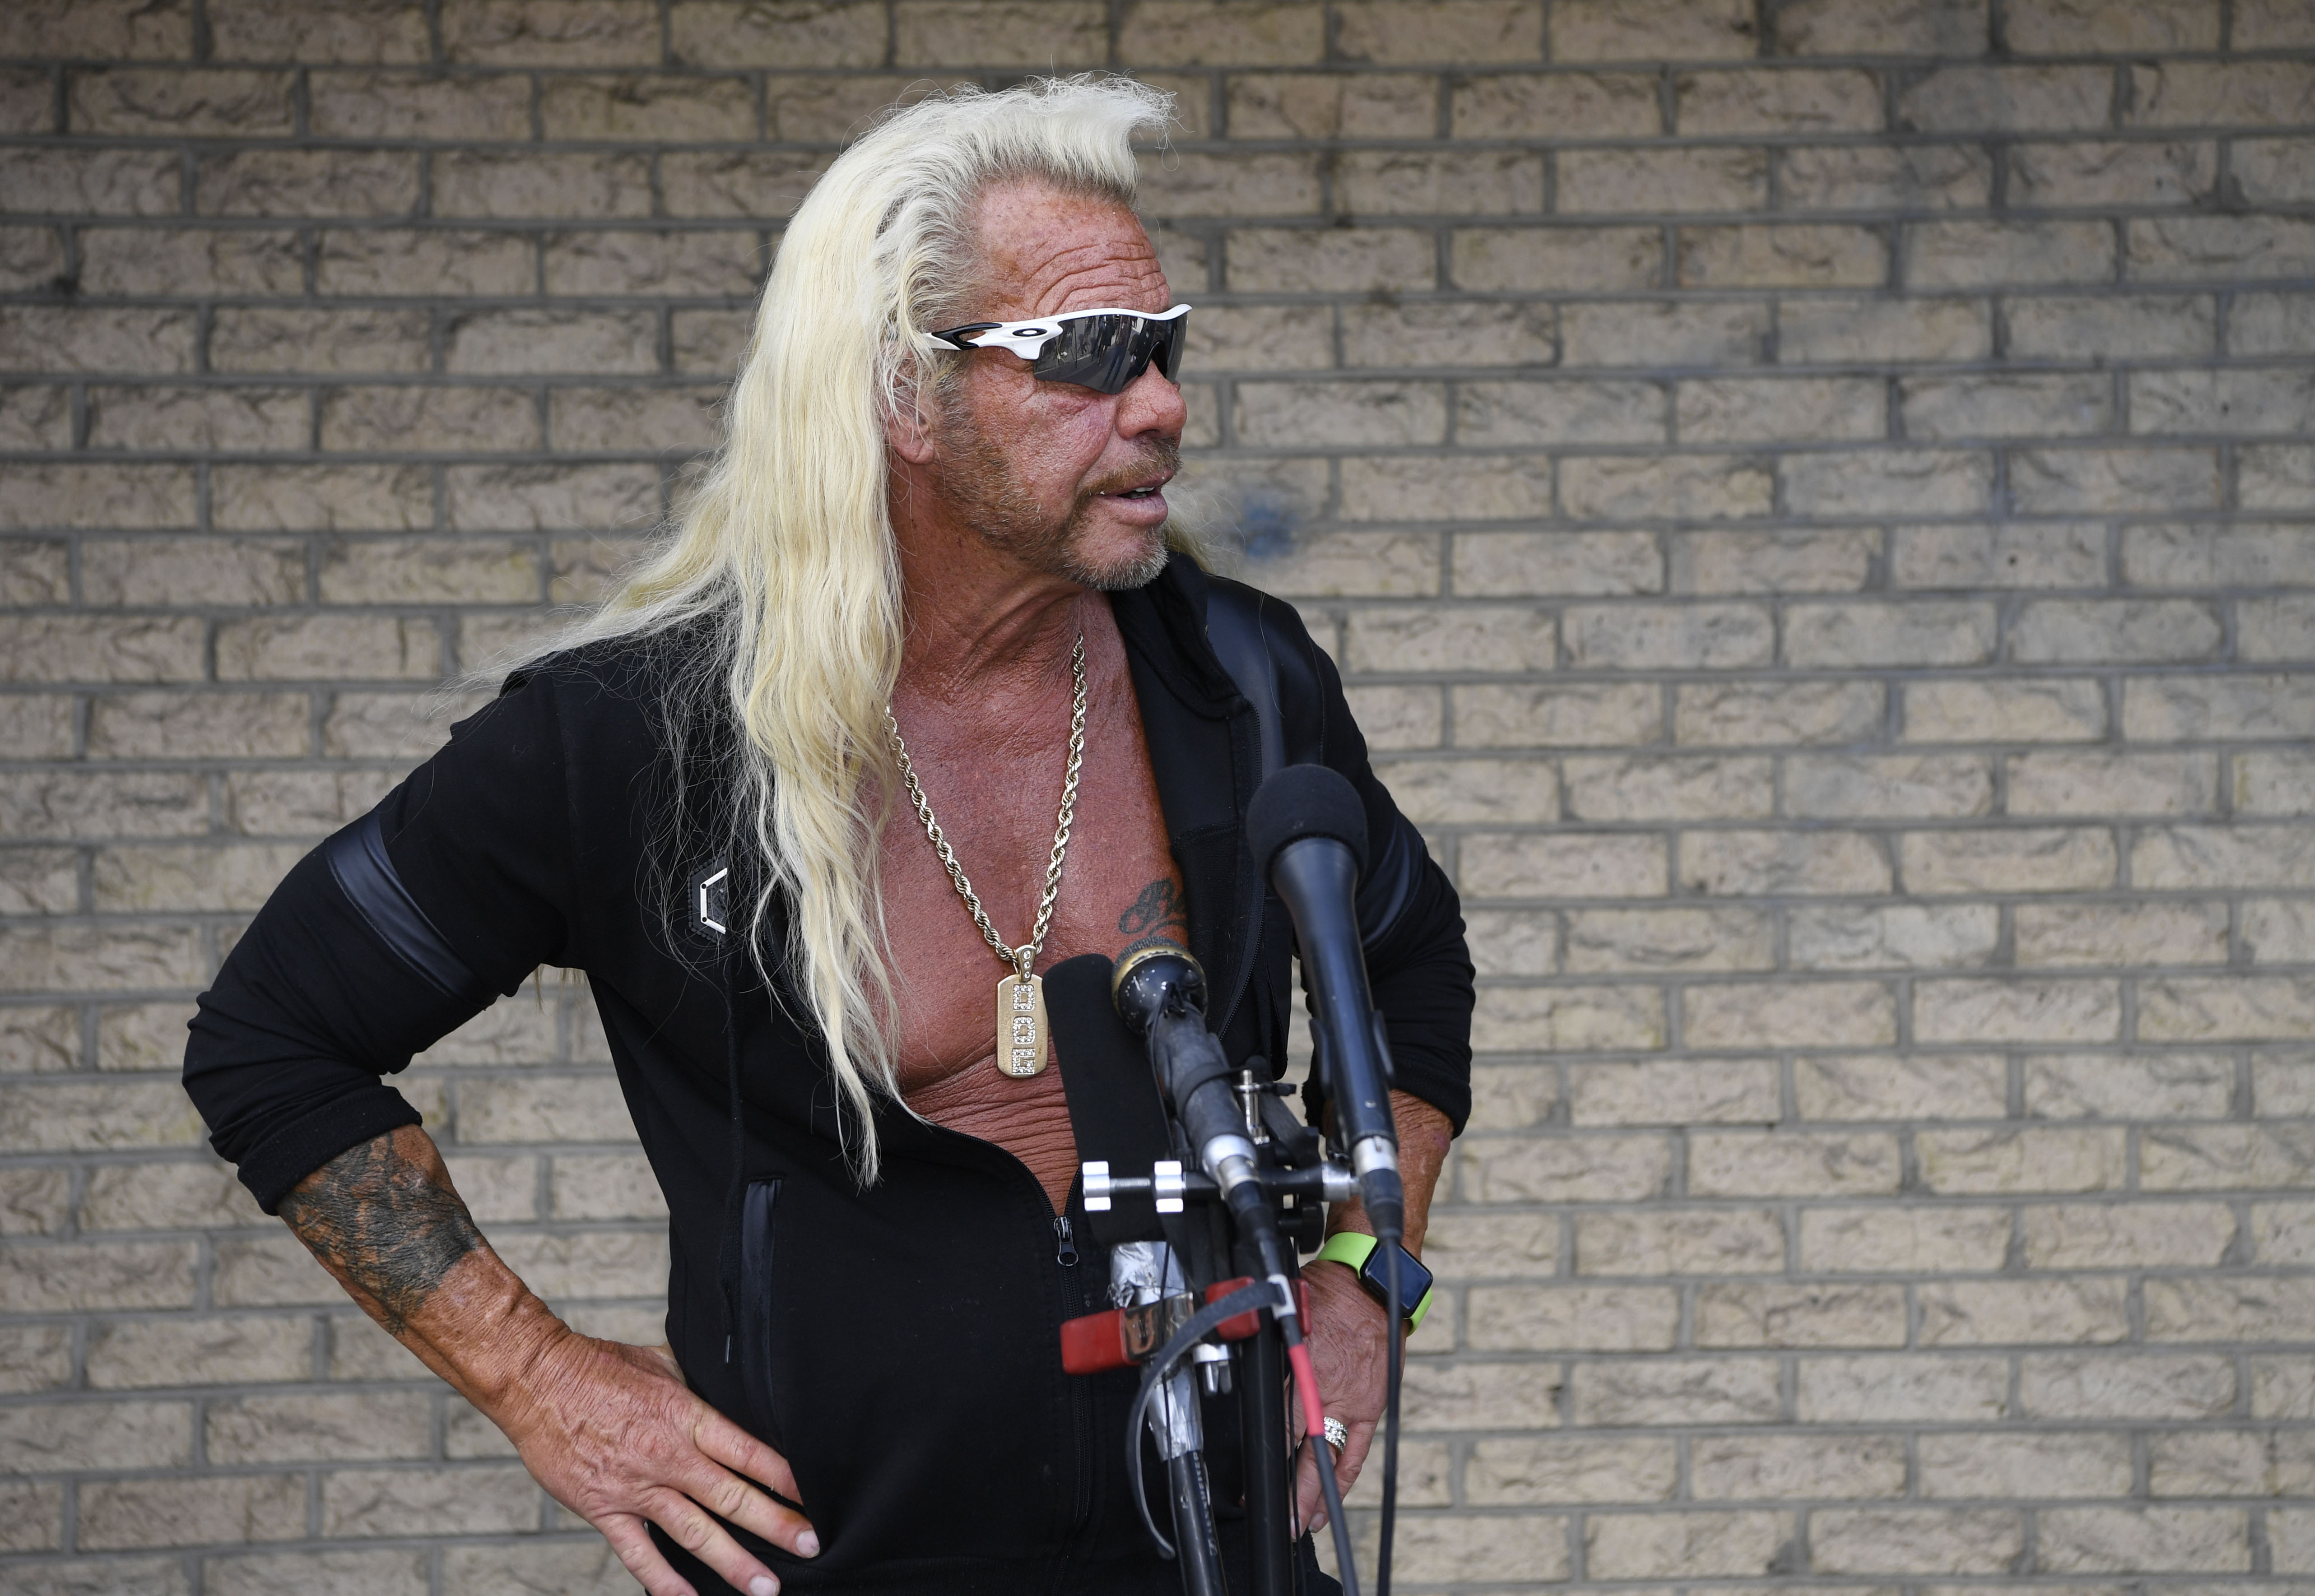 Dog the Bounty Hunter answers questions at a press conference in August 2019